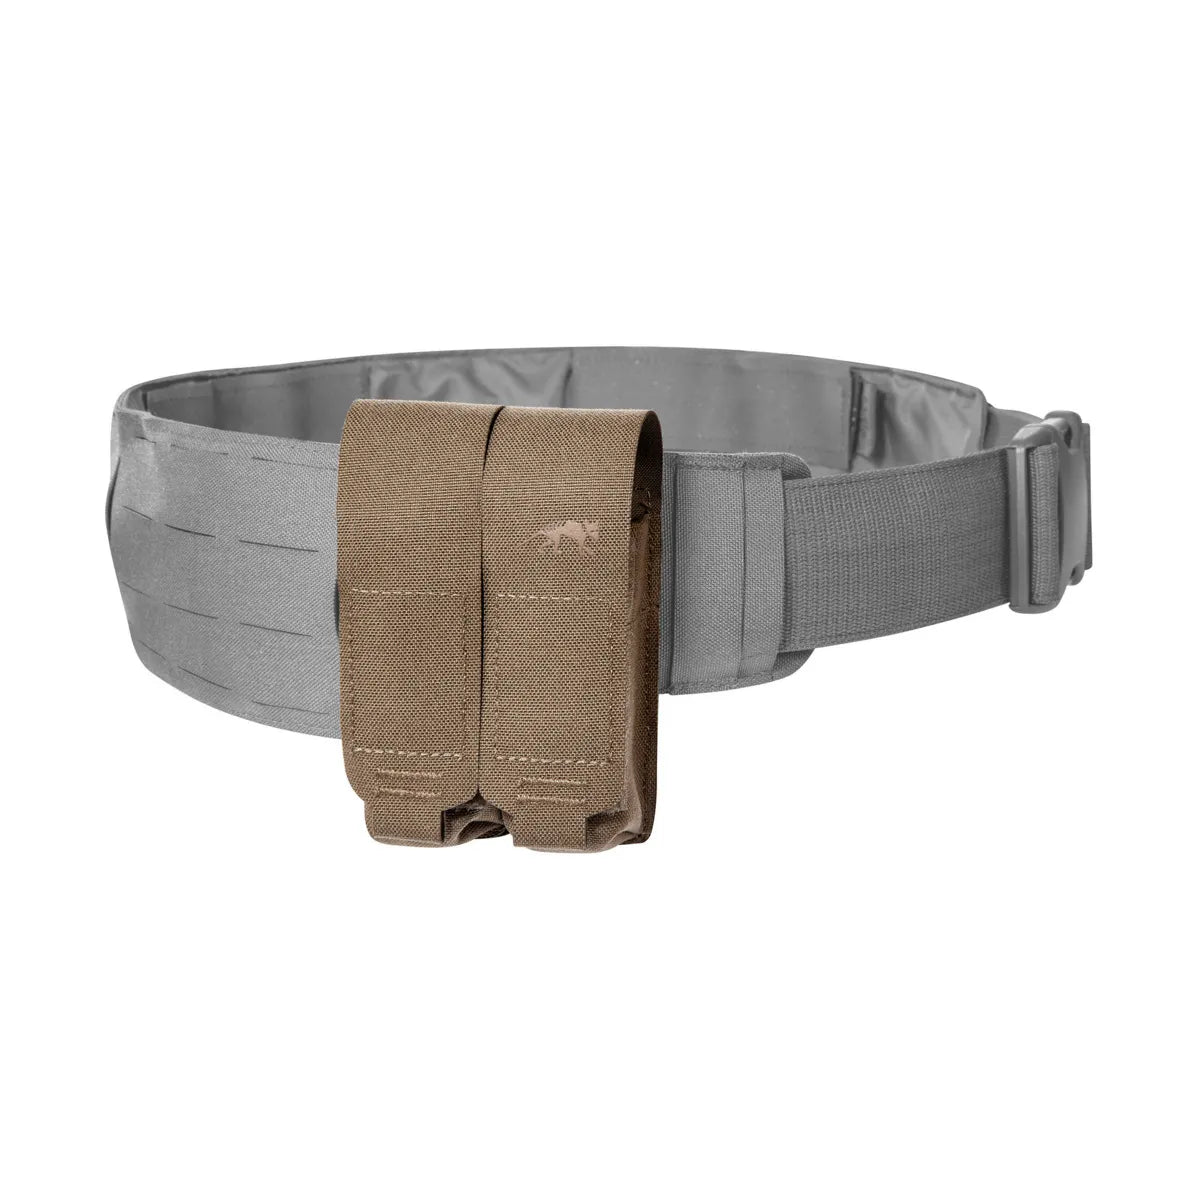 Tasmanian Tiger - DBL Pistol Mag Pouch MKIII - Coyote Brown